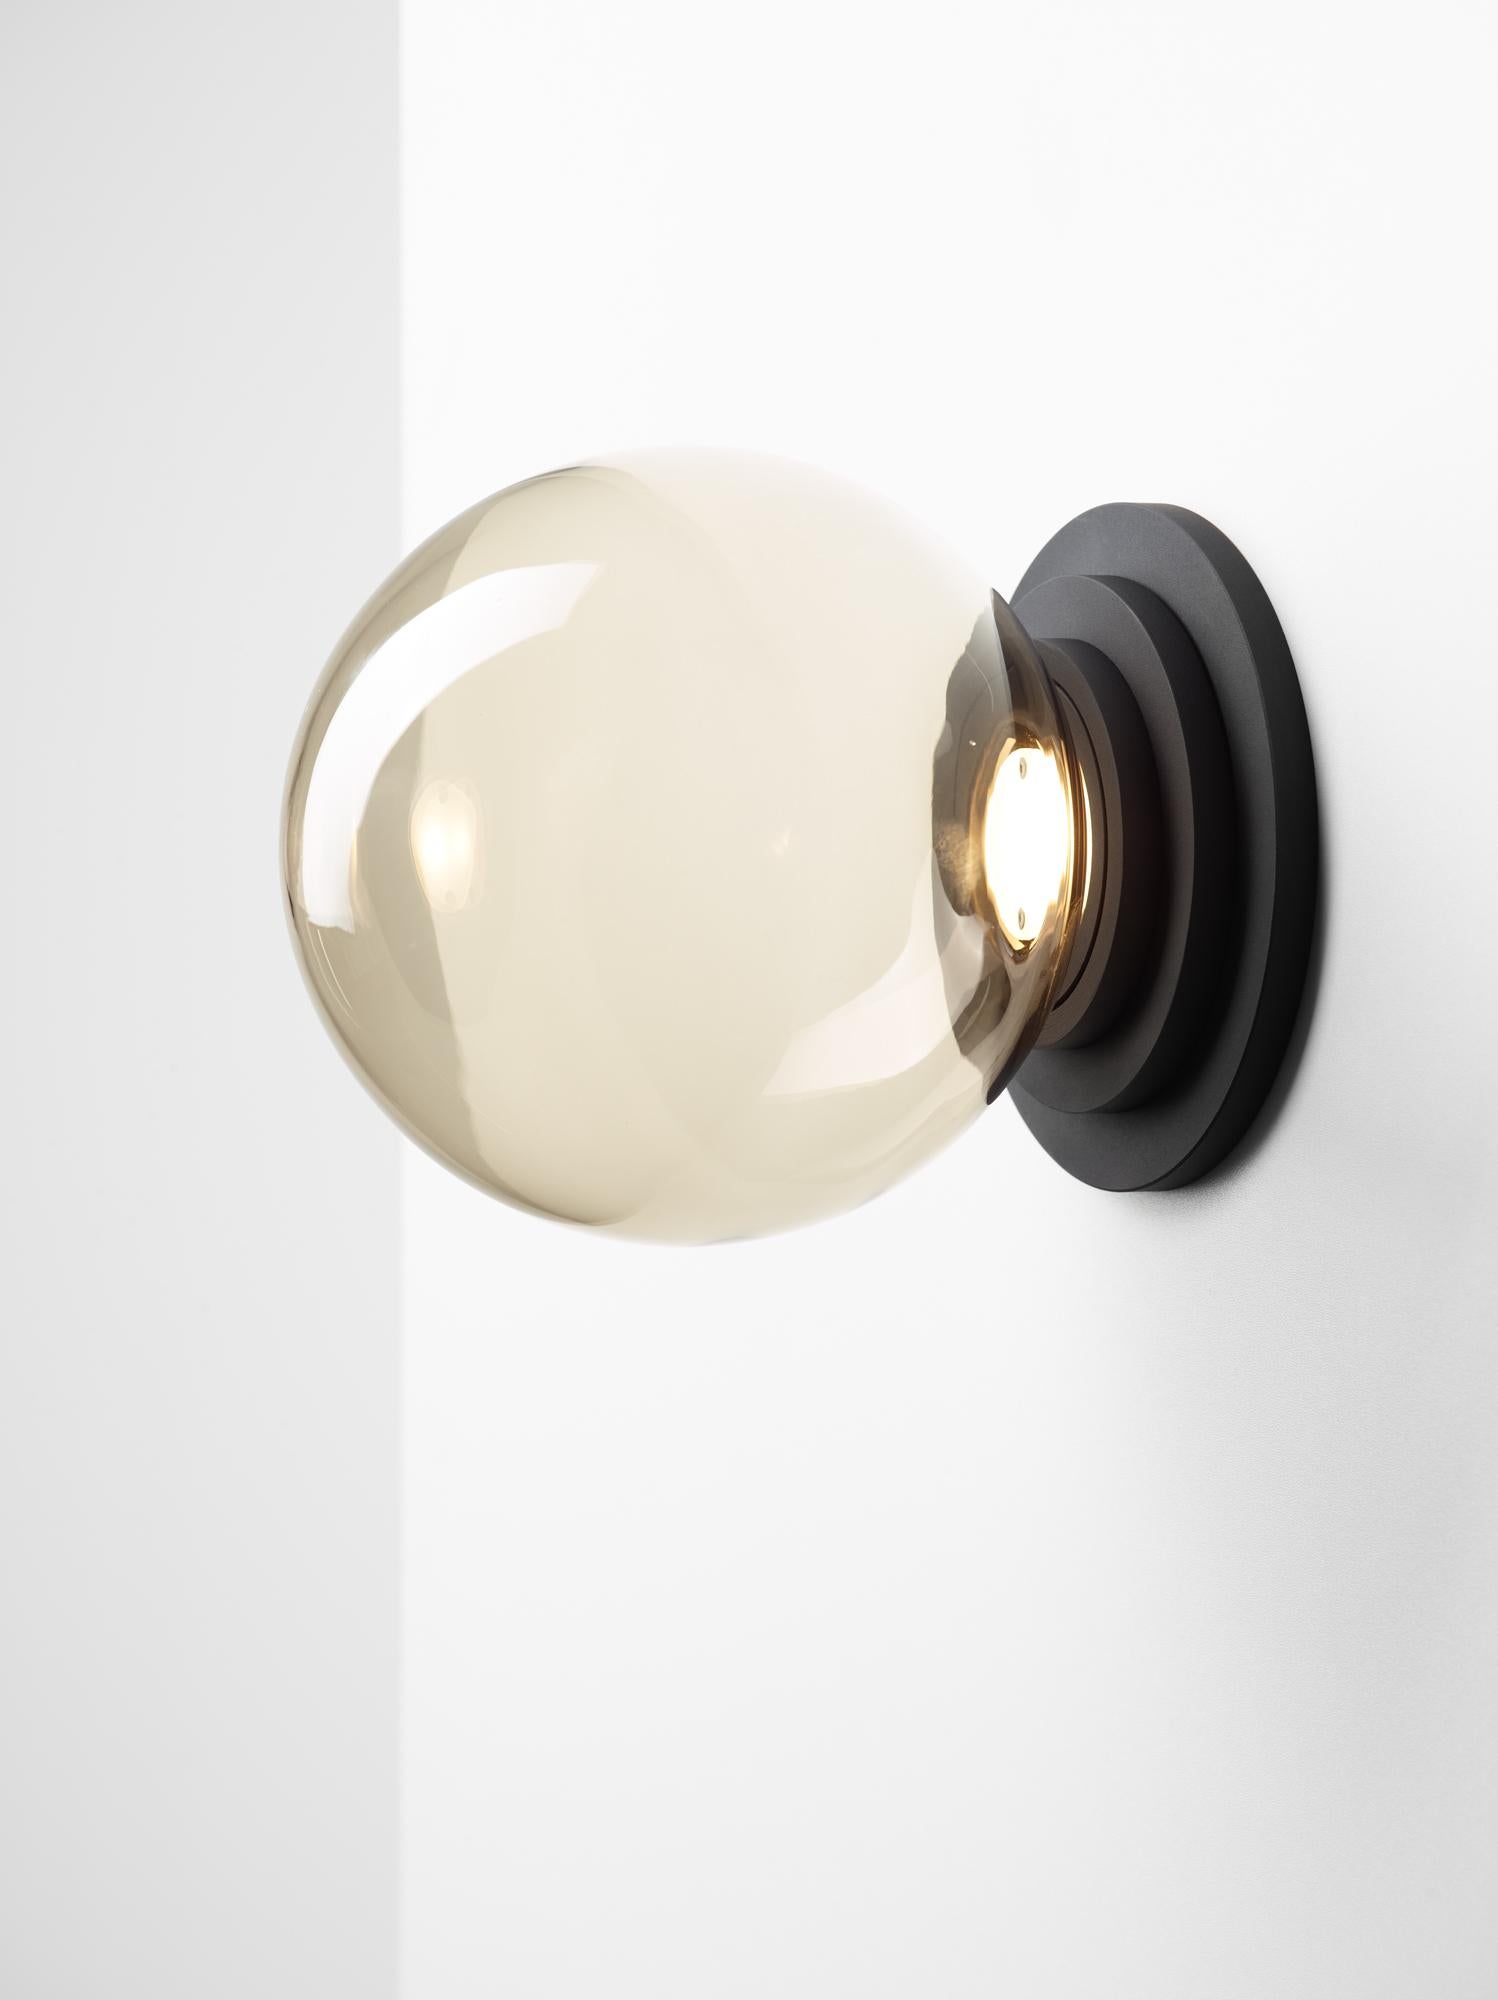 Set of 2 black stratos ball wall light by Dechem Studio.
Dimensions: D 18 x H 20 cm.
Materials: aluminum, glass.
Also available: different colours available.

Different shapes of capsules and spheres contrast with anodized alloy fixtures,